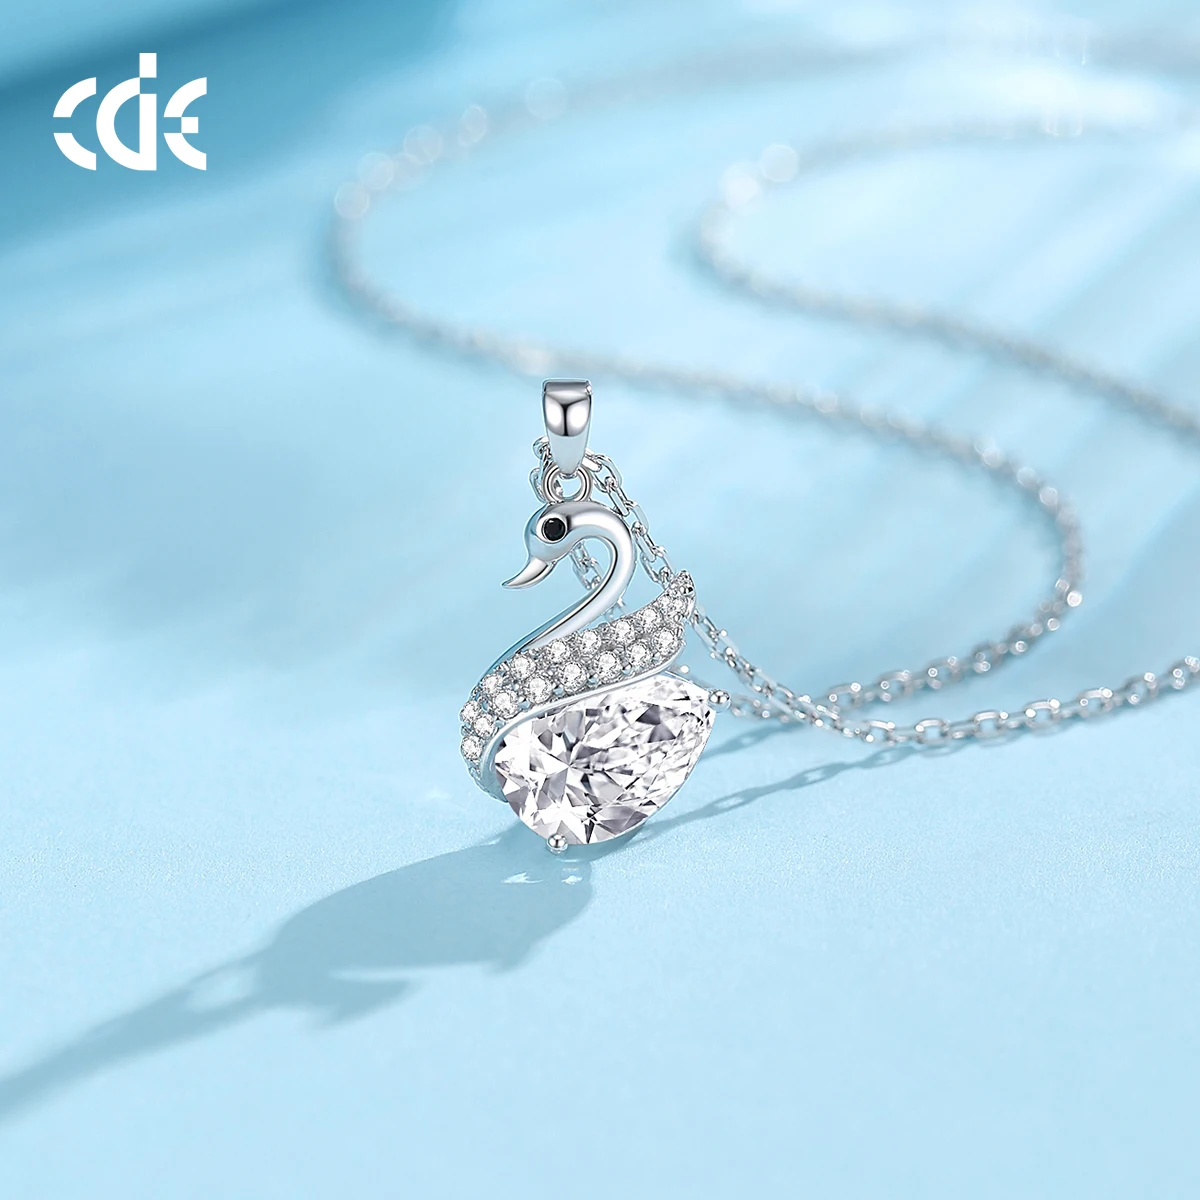 CDE WYN21 Crafted 925 Sterling Silver Necklaces Wholesale Zircon Bulk Fine Jewelry For Women Swan Pendant Necklace